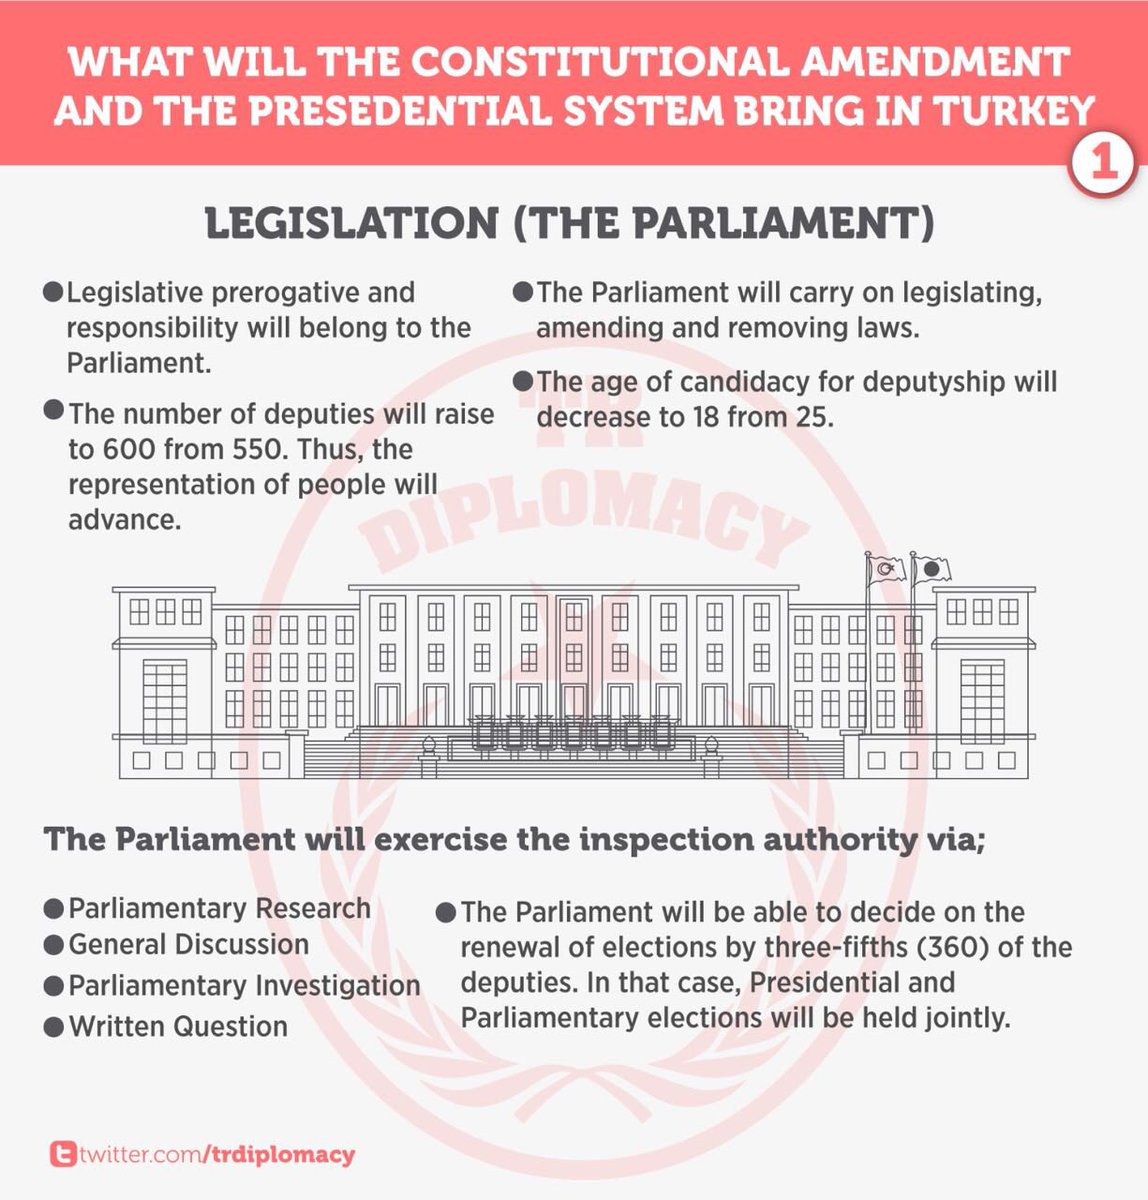 What will constitutional amendment and Presidential System bring?